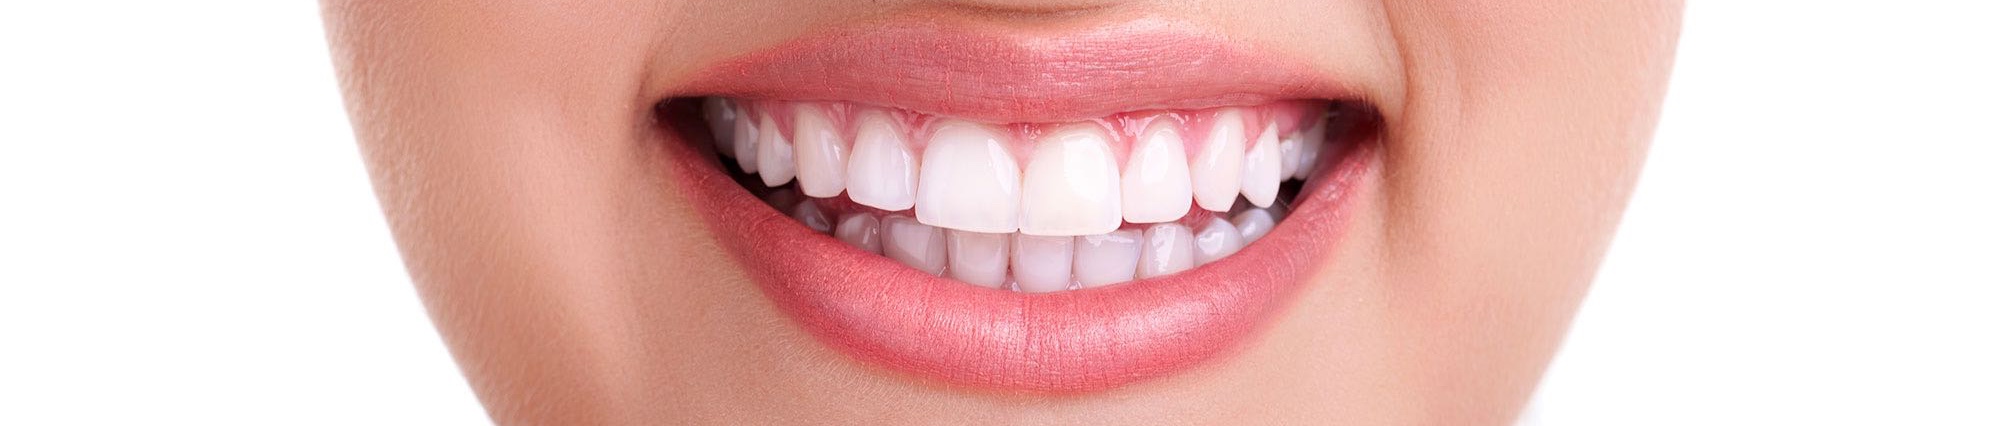 Brighten Up-Your-Smile-With-Shining-White-Teeth%20copy%202